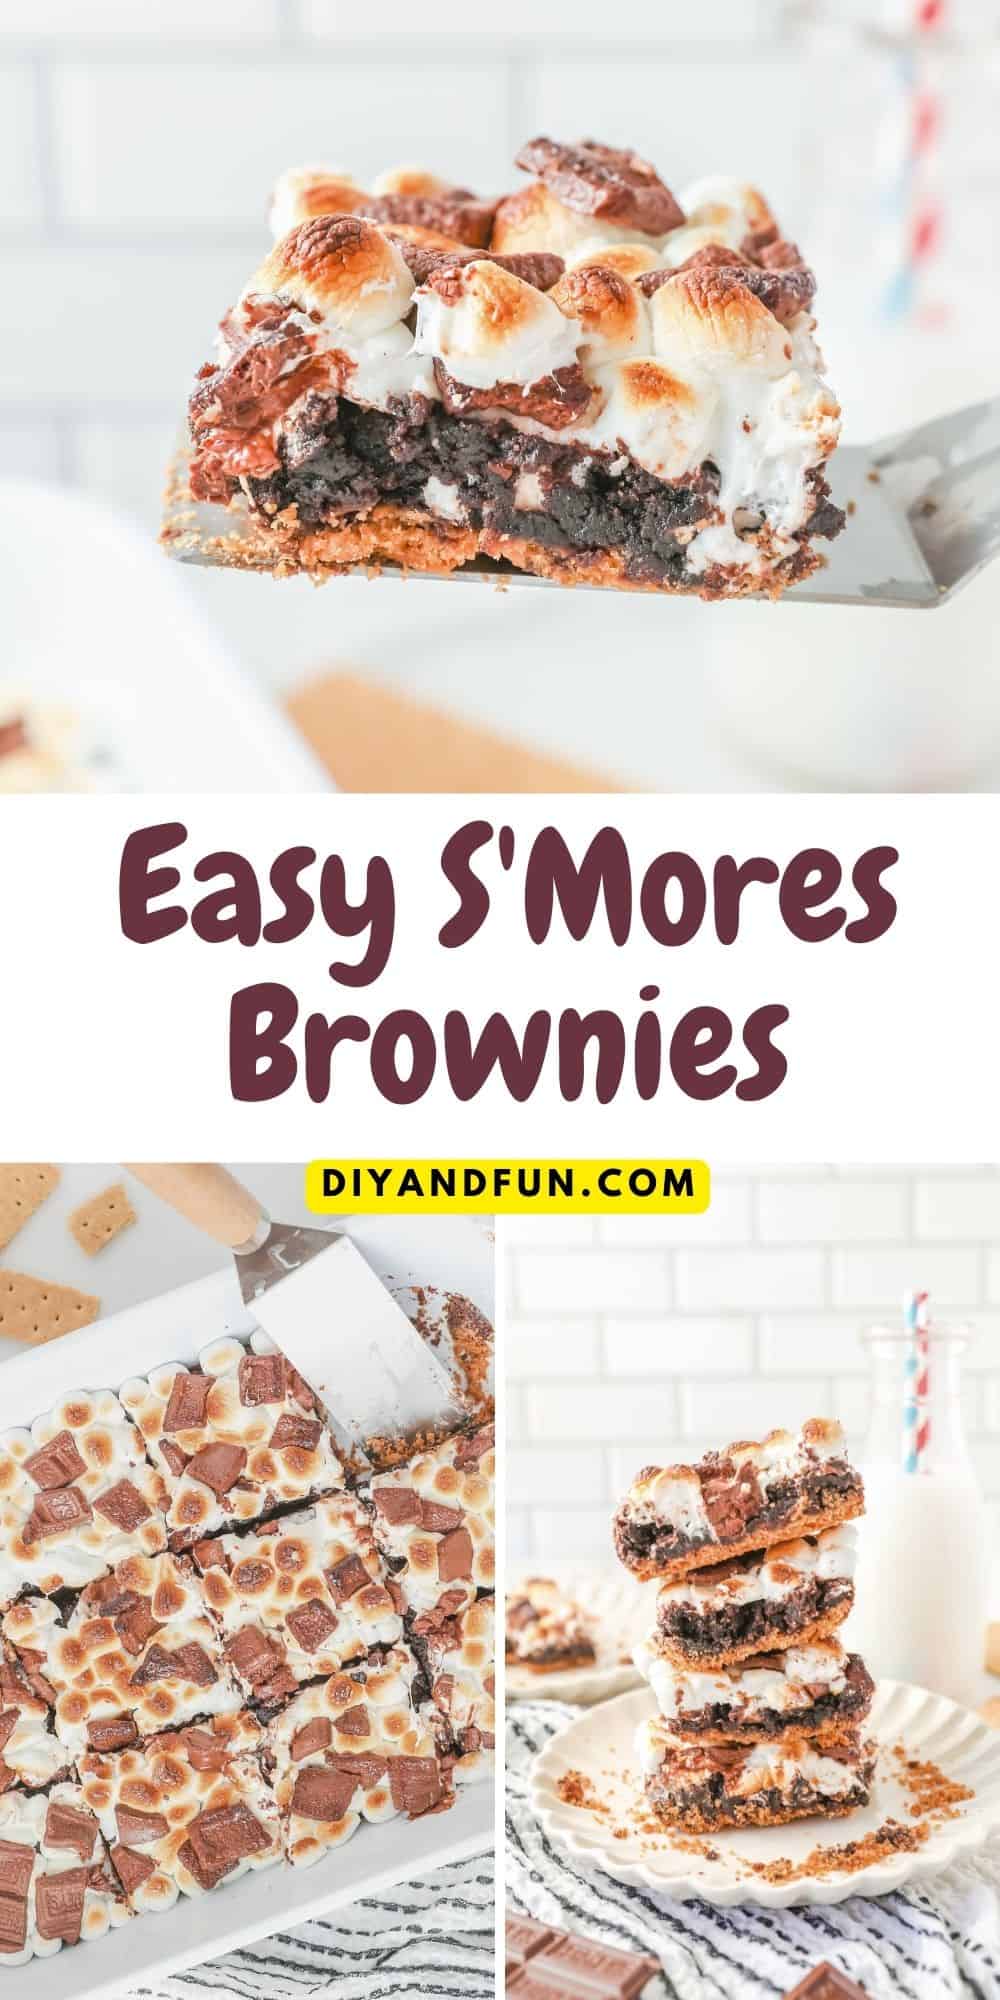 How to make S'Mores Brownies, a simple and delicious recipe idea that combines the goodness of brownies with tasty S'Mores.